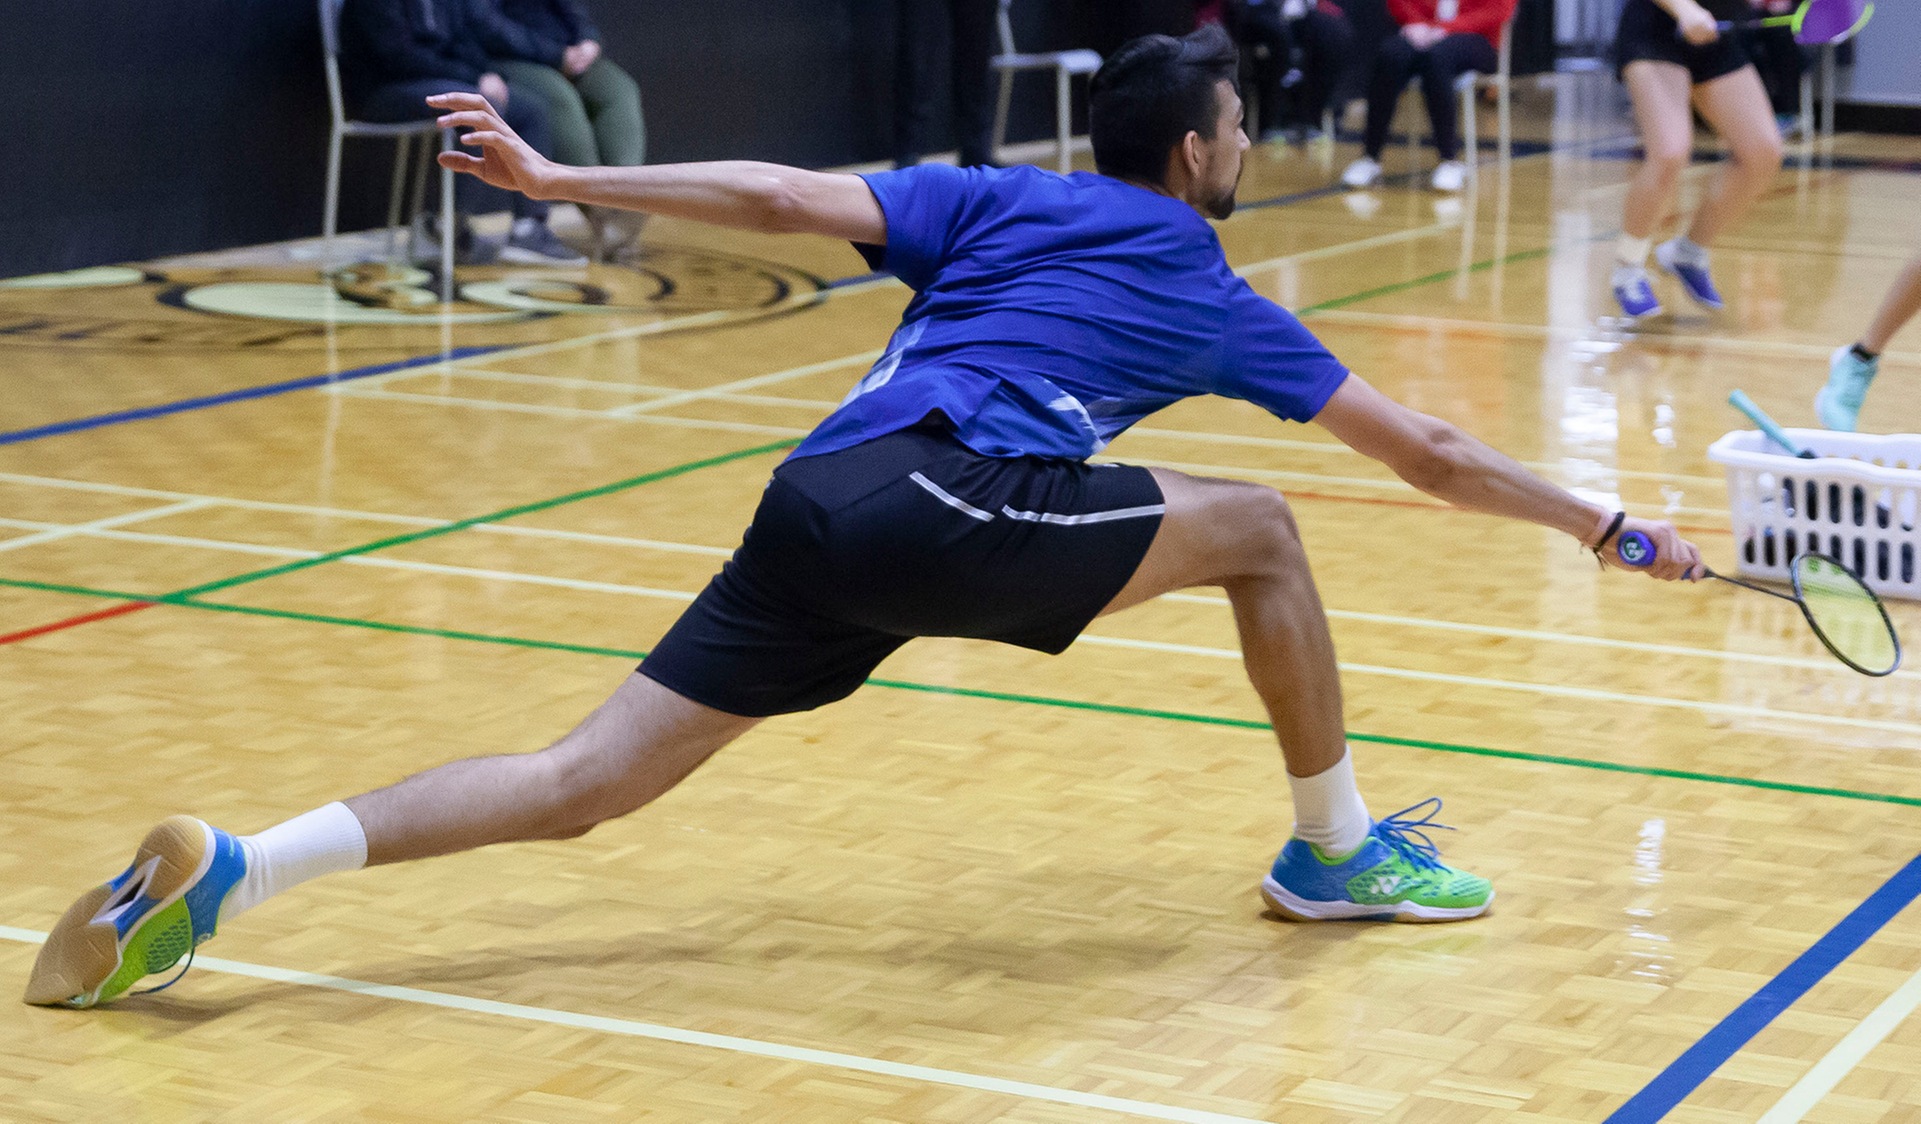 INJURED AND BATTERED KUMAR ADVANCES TO CCAA MEN’S SINGLES GOLD MATCH